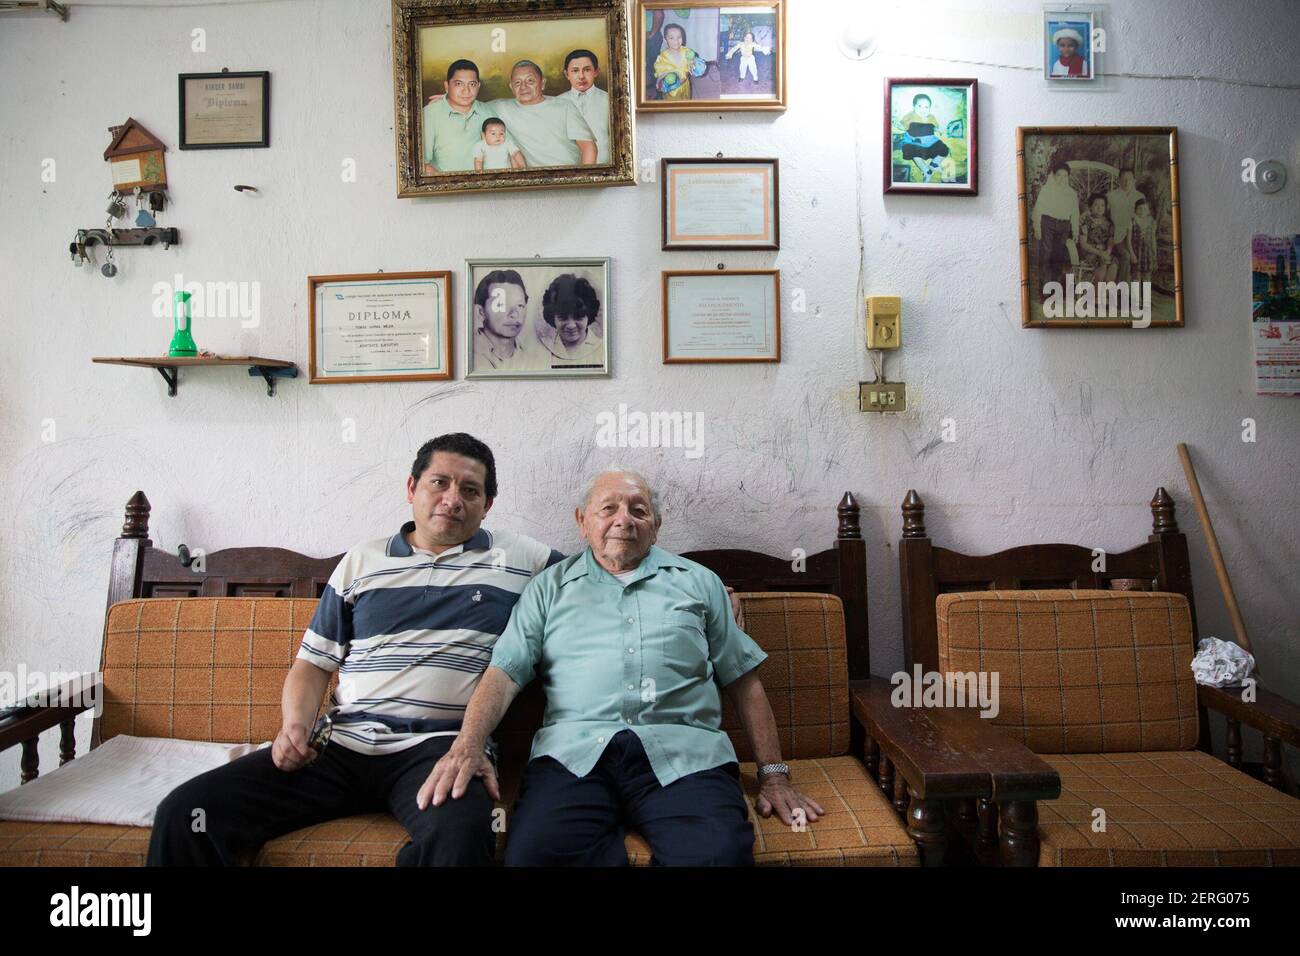 Portrait of Tomás Garma Rodriguez (R), 87, a retired Pemex worker and his son Tomás Garma Mejia (L), 45 at their home in Villahermosa, Tabasco state, Mexico on June 18, 2018. (Photo by Bénédicte Desrus/Sipa USA) Stock Photo